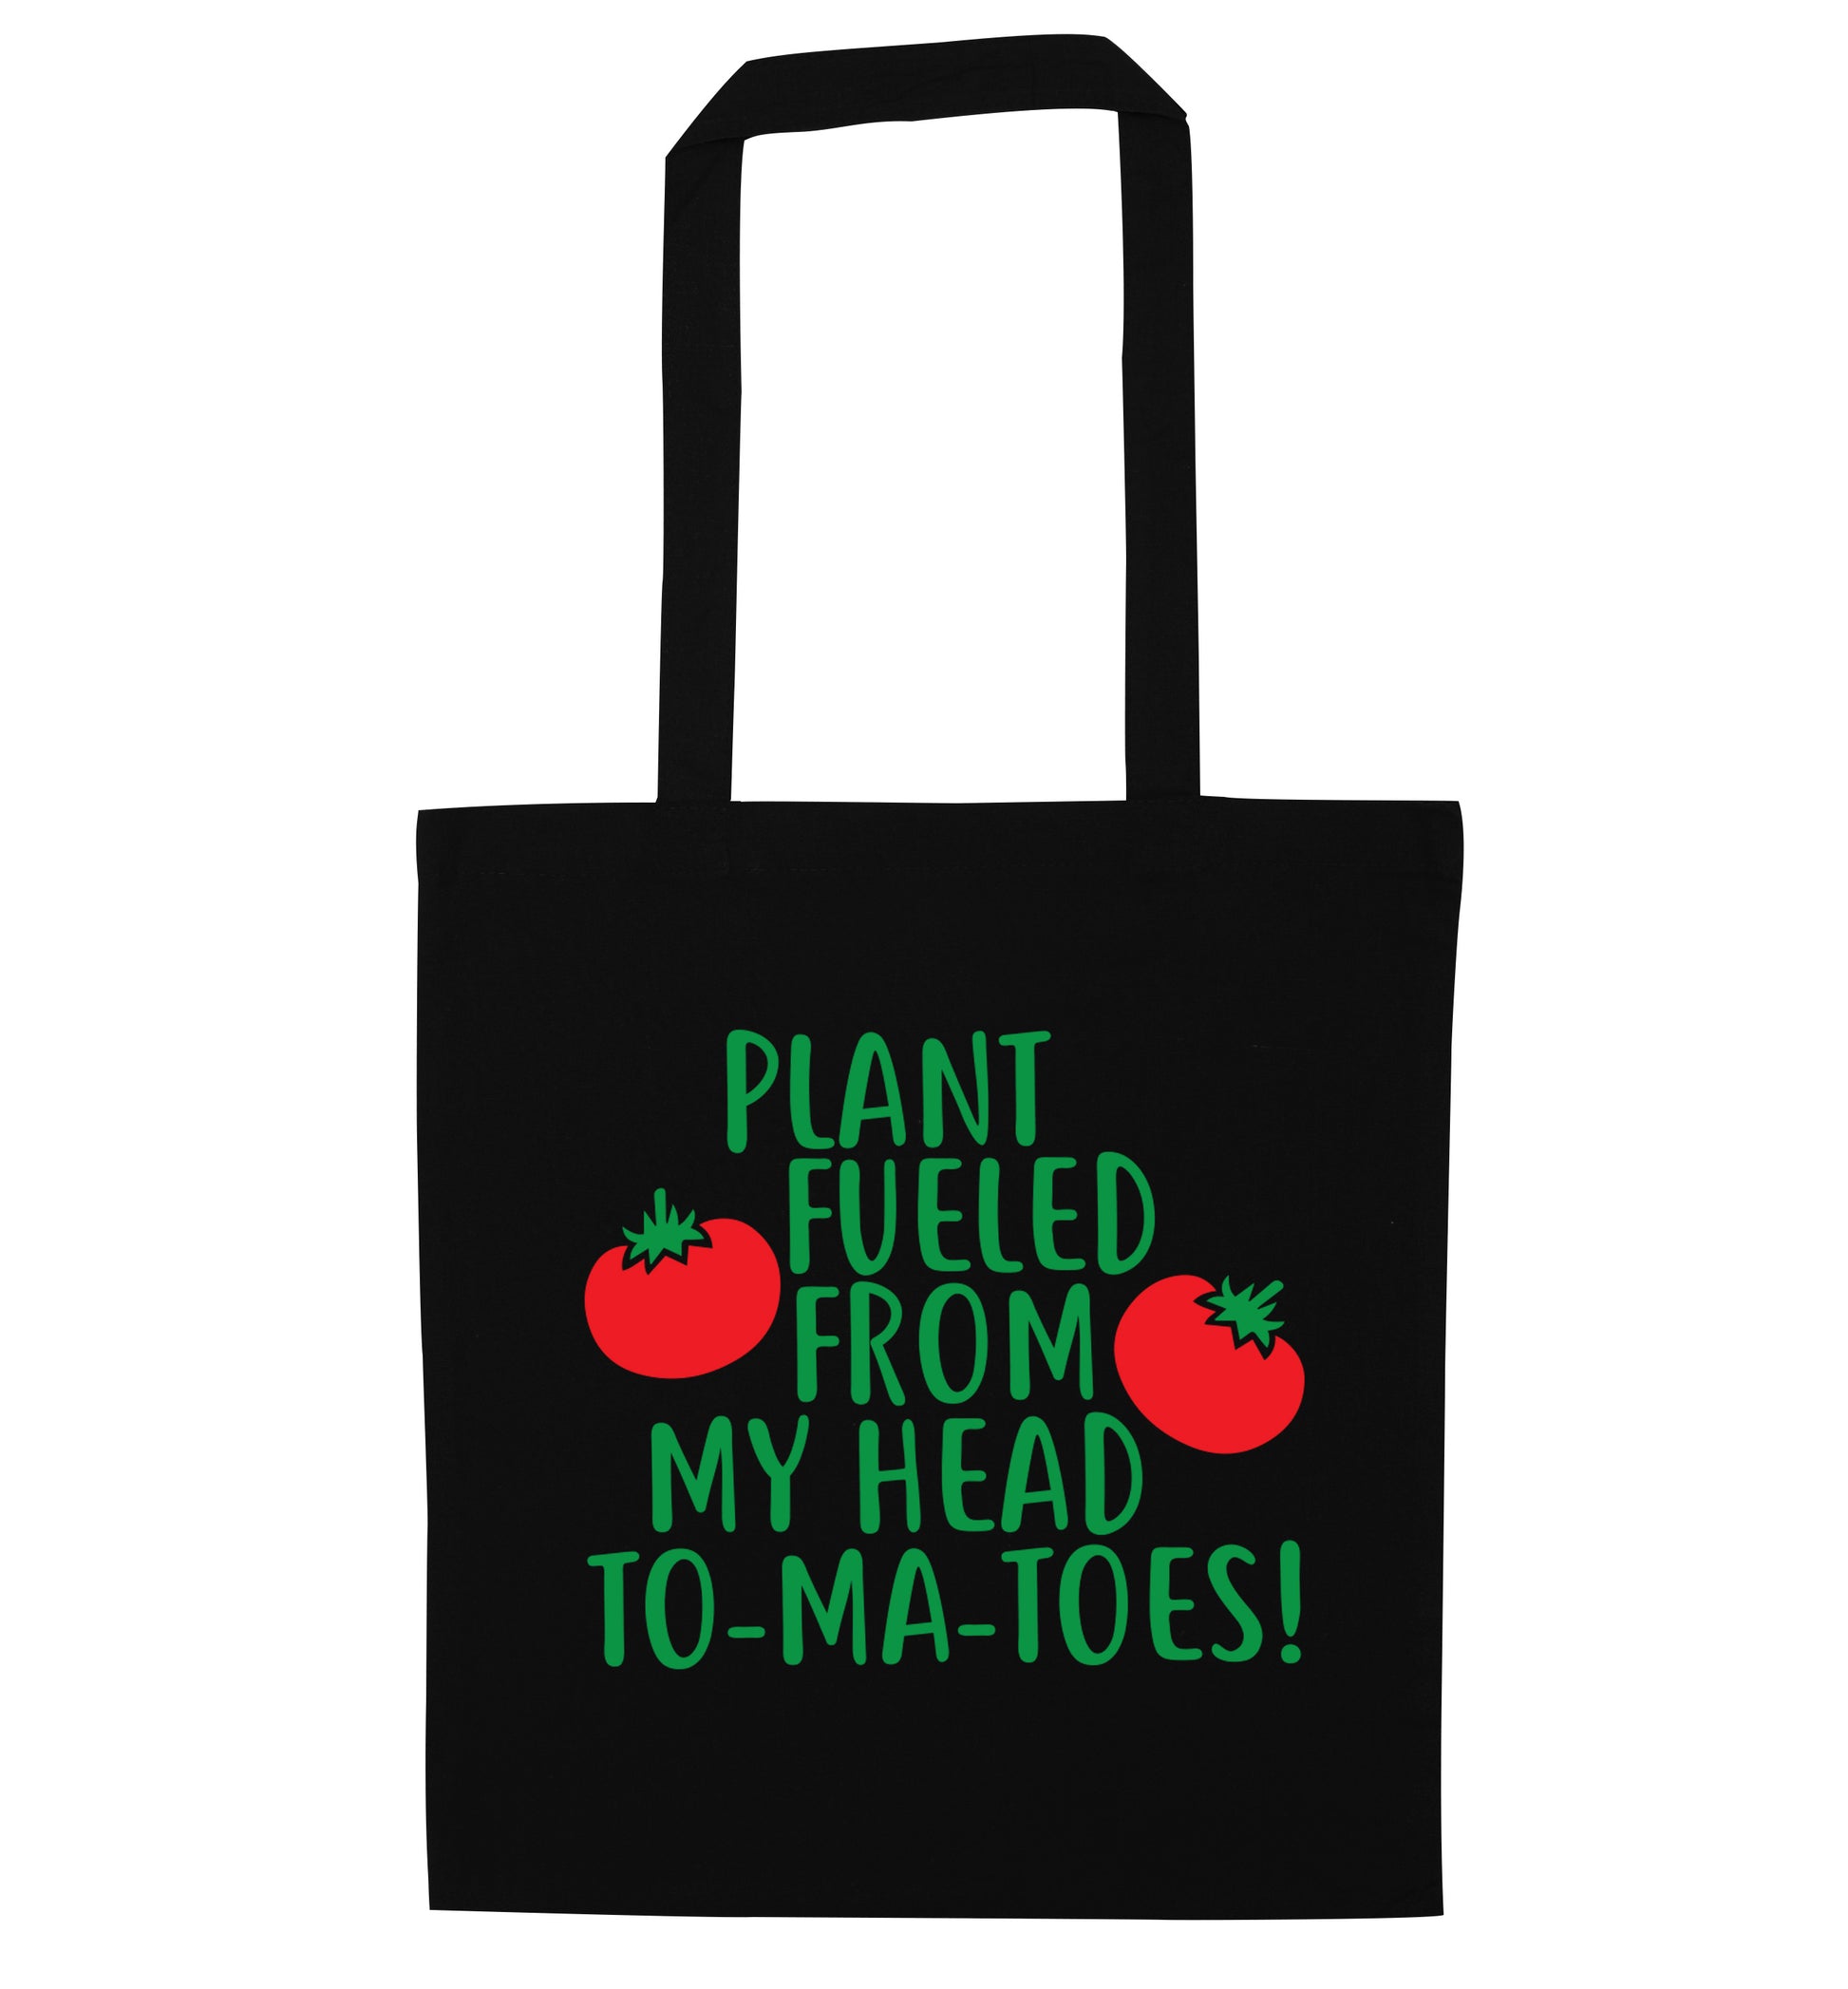 Plant fueled from my head to-ma-toes black tote bag